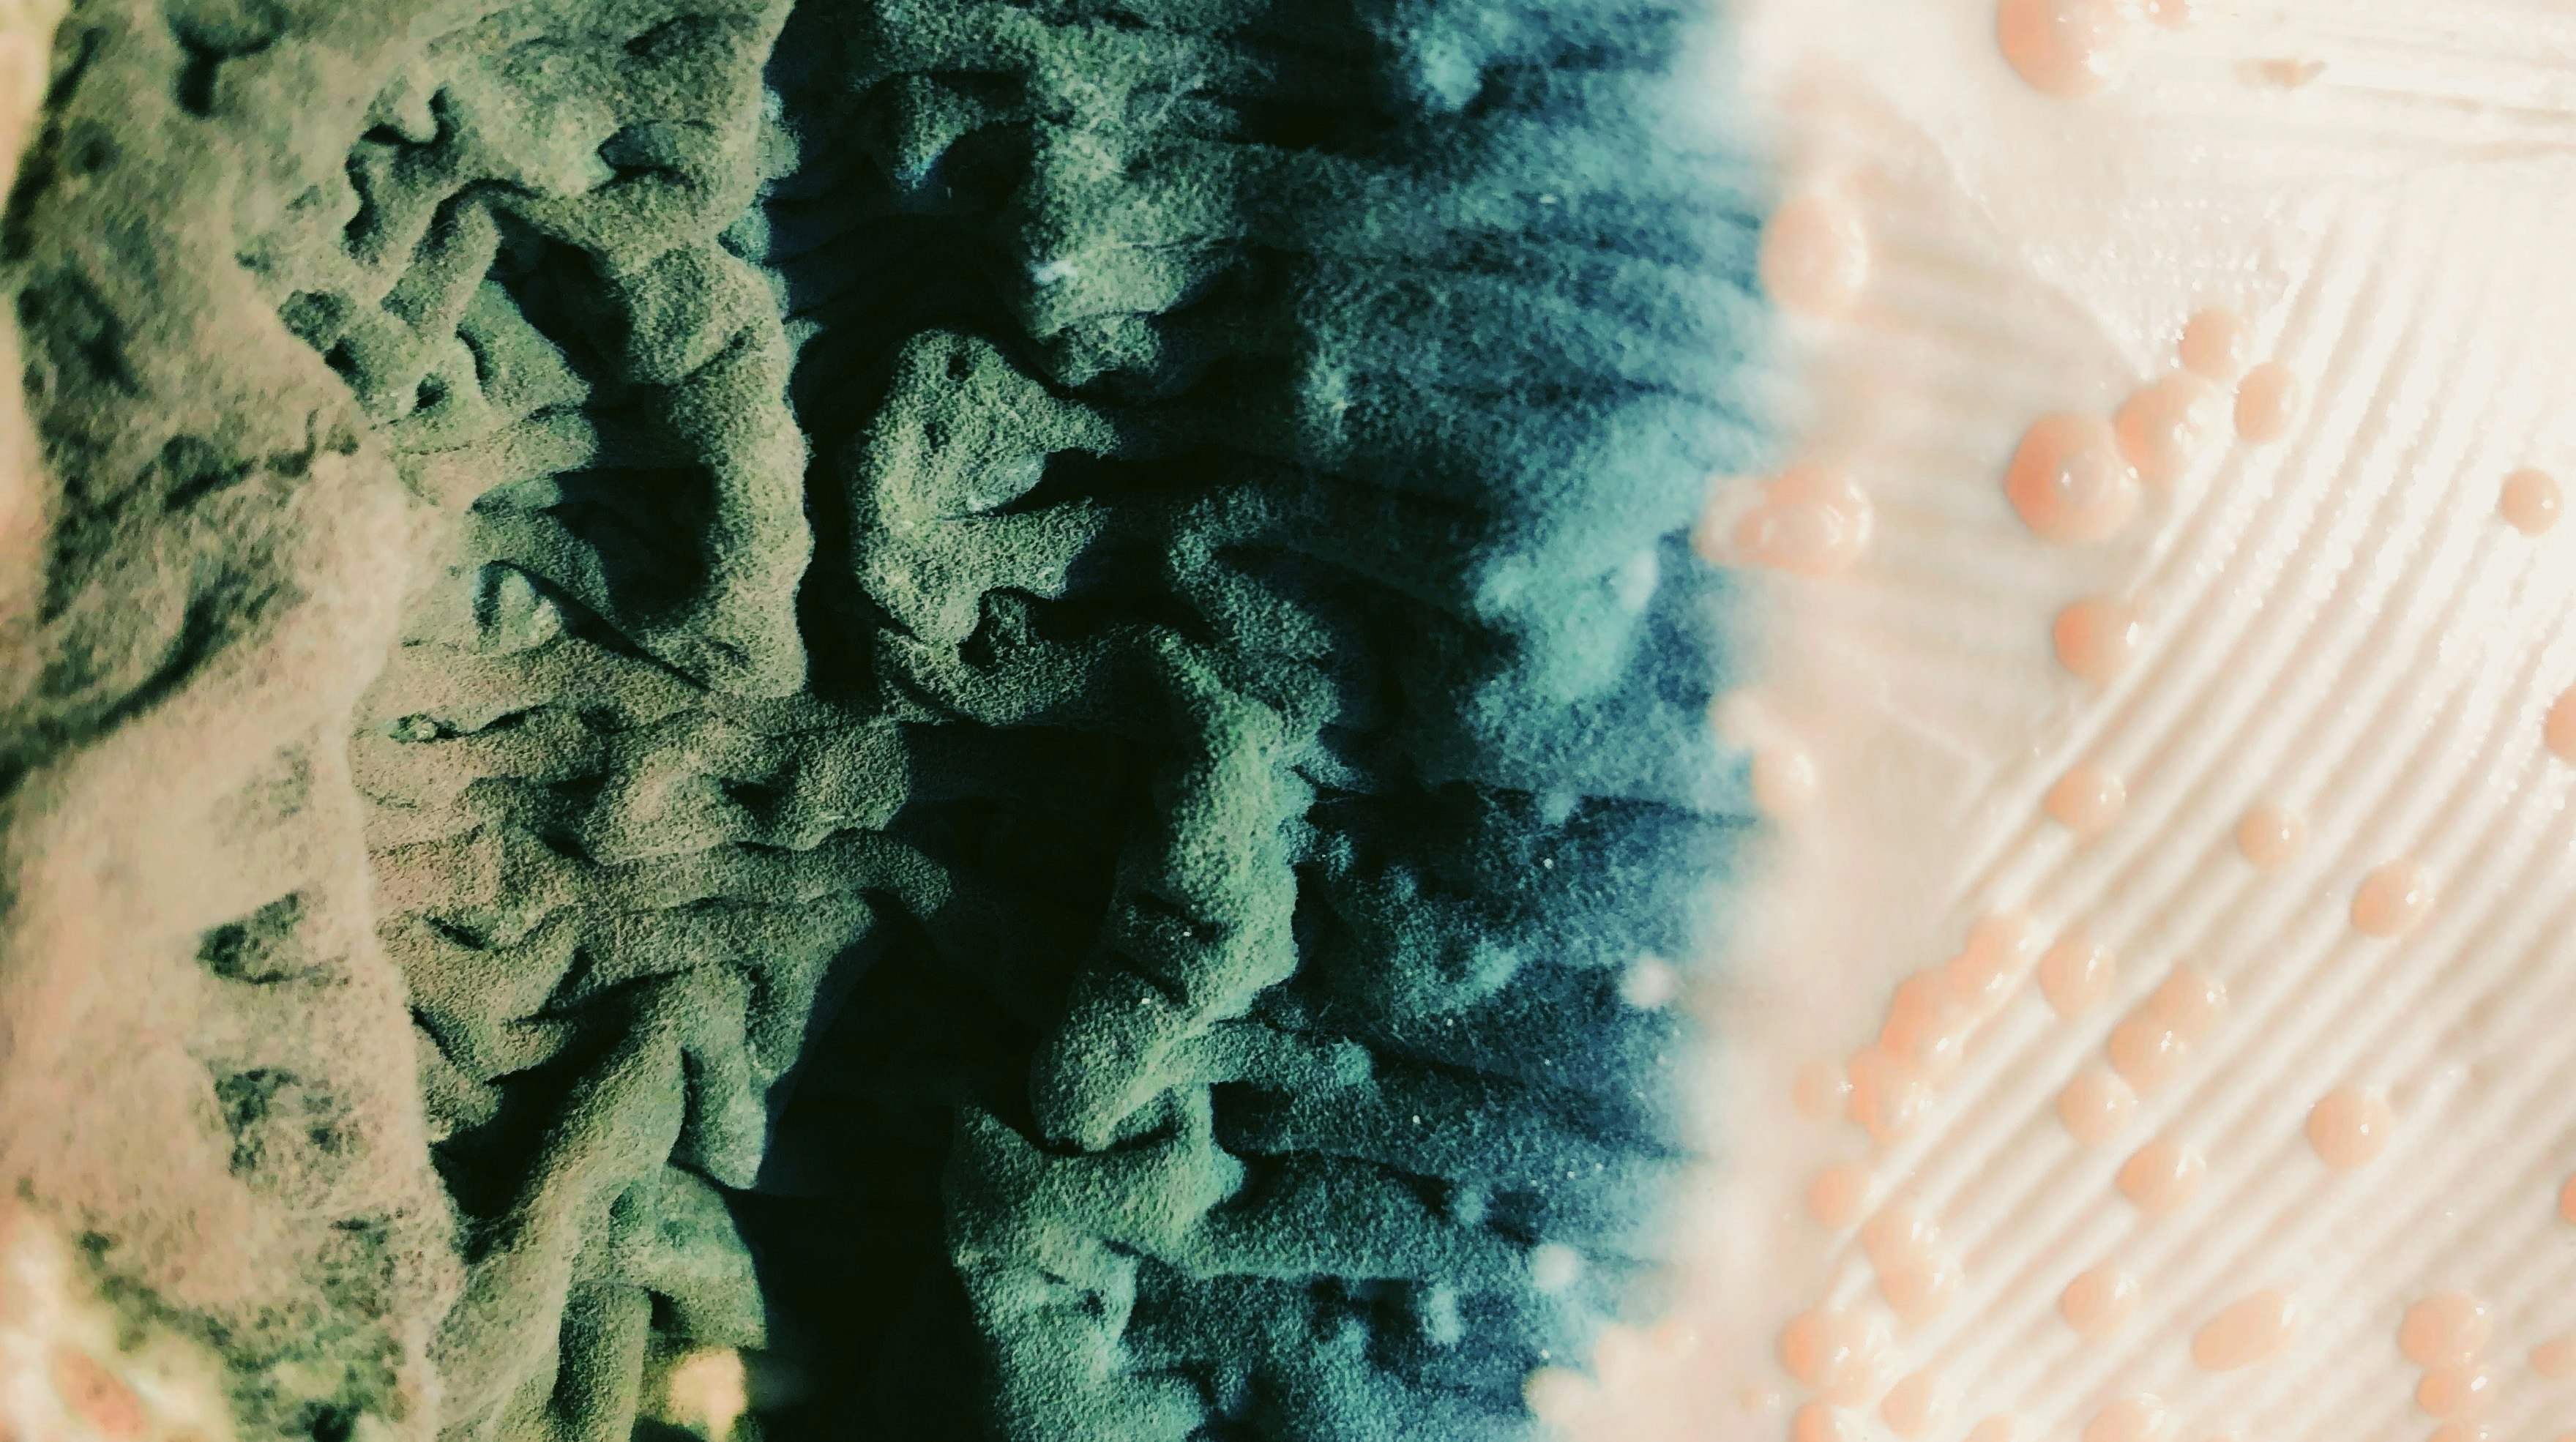 a "landscape" of green and blue folds and tan bubbles